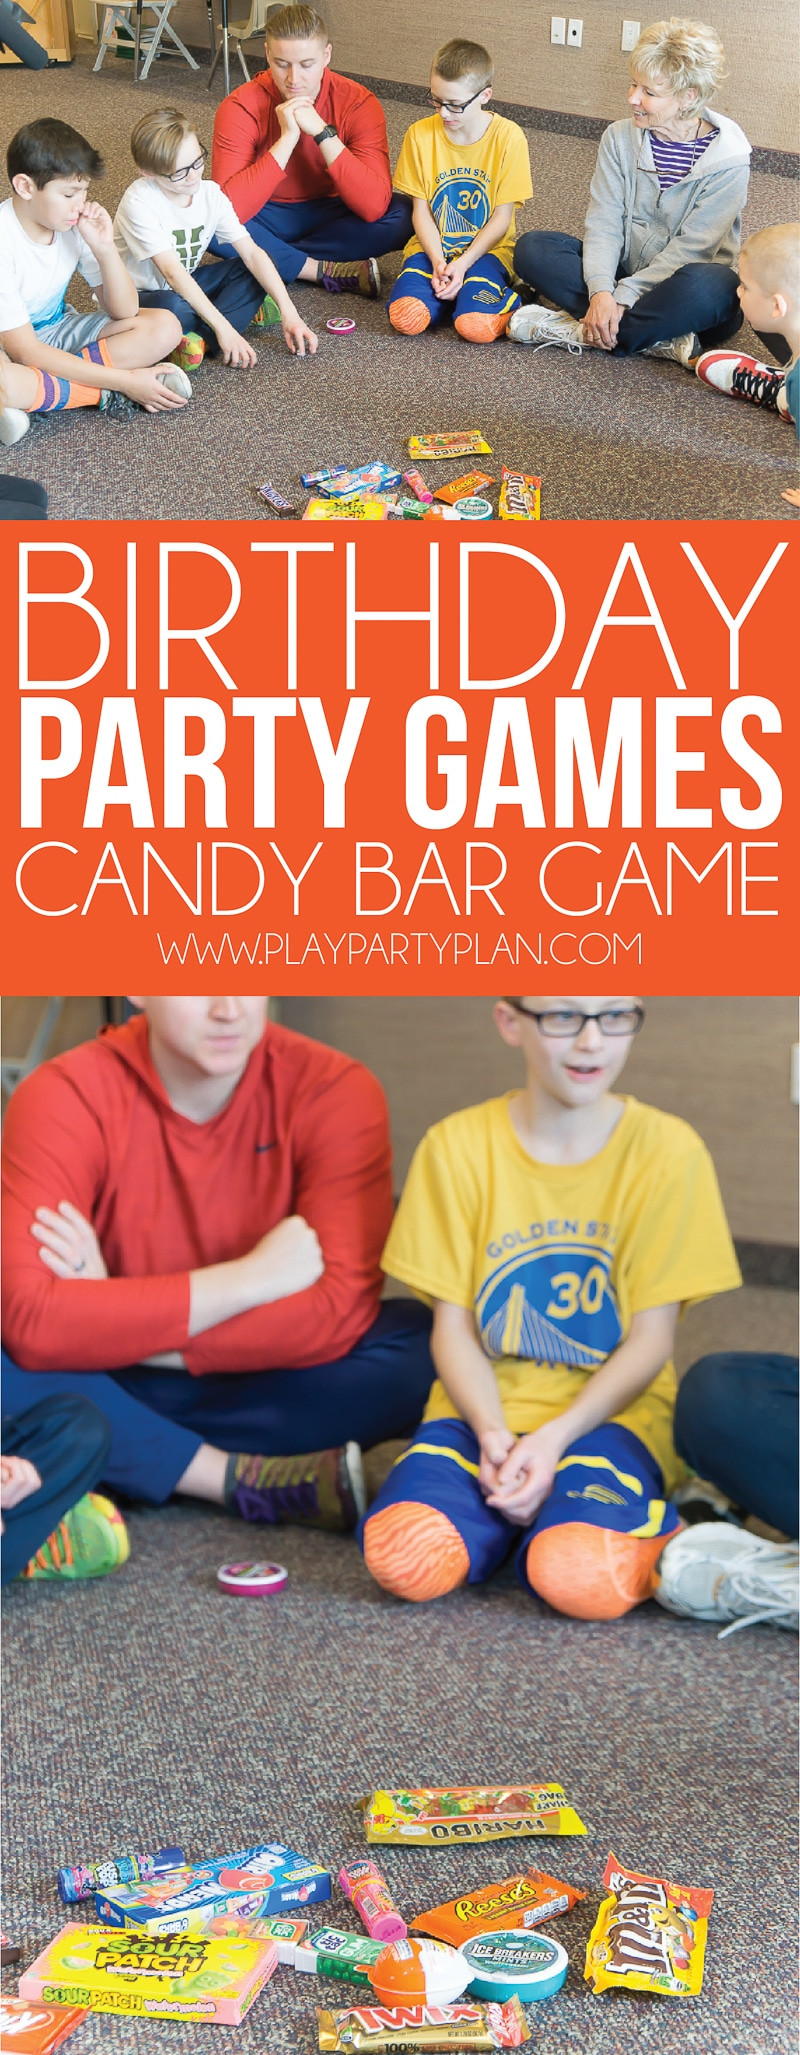 Party Kids Games
 Hilarious Birthday Party Games for Kids & Adults Play